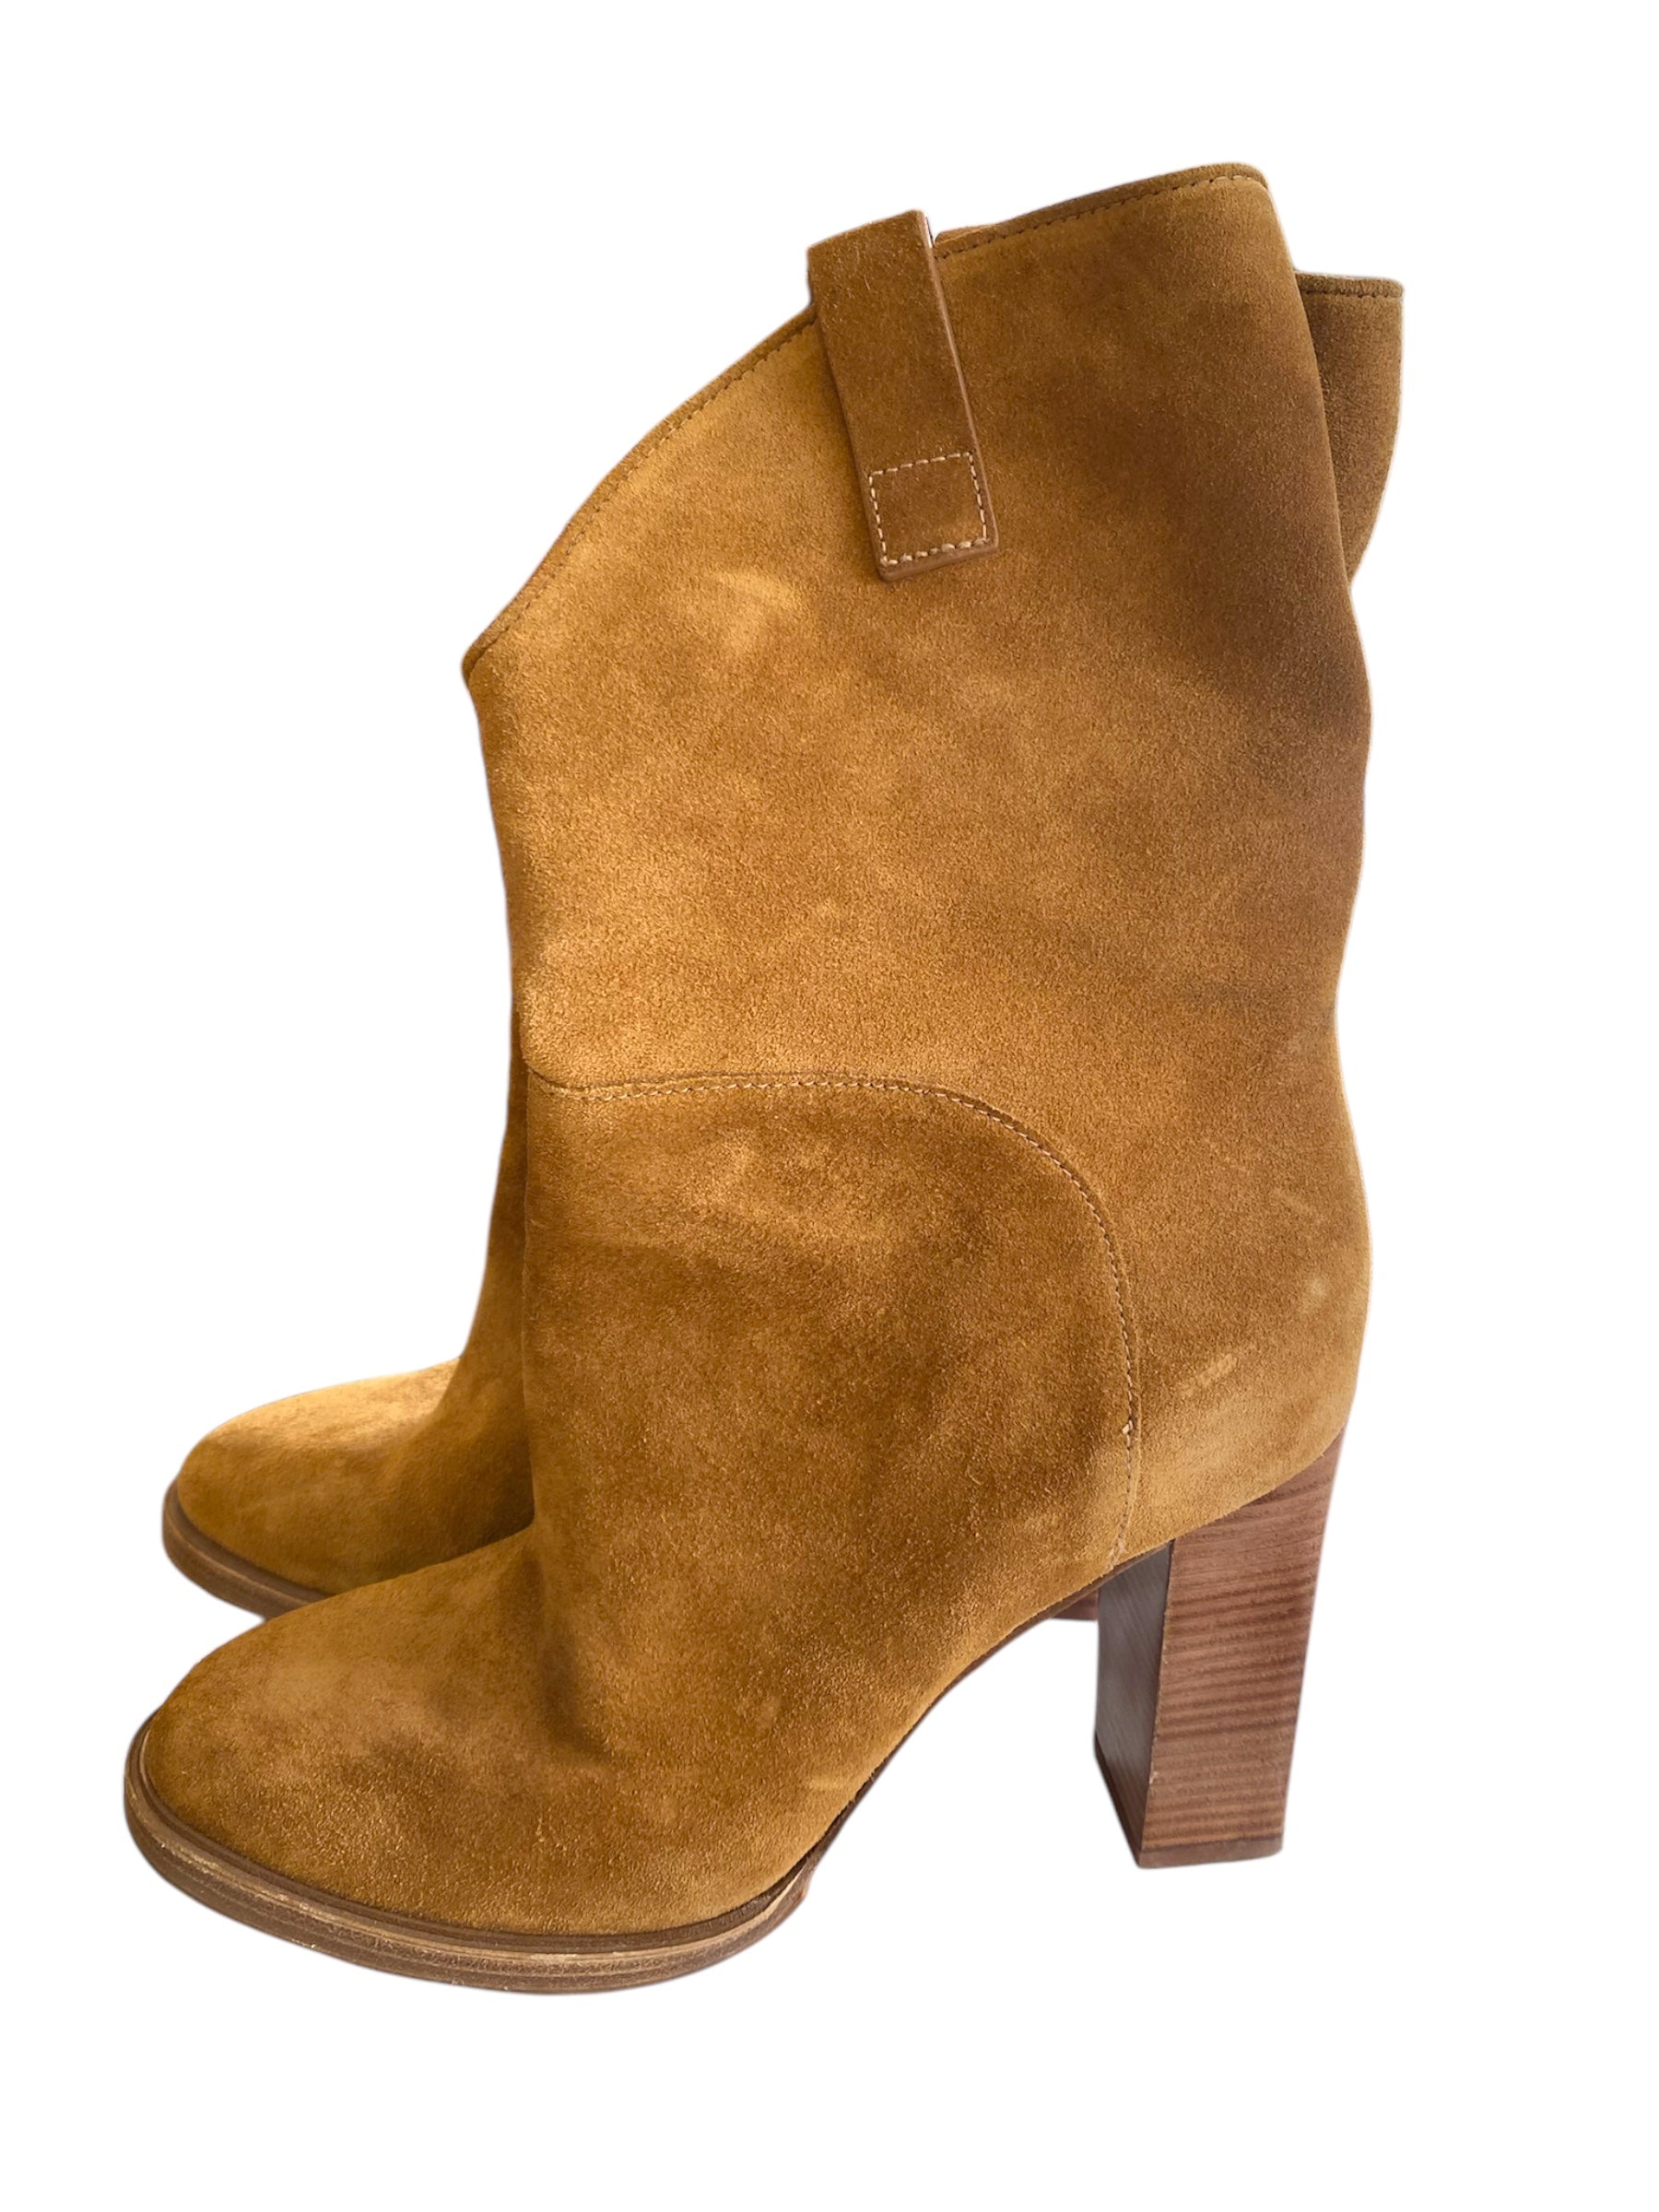 Sigerson Morrison Tan Suede Ankle Boot | Size 6 1/2